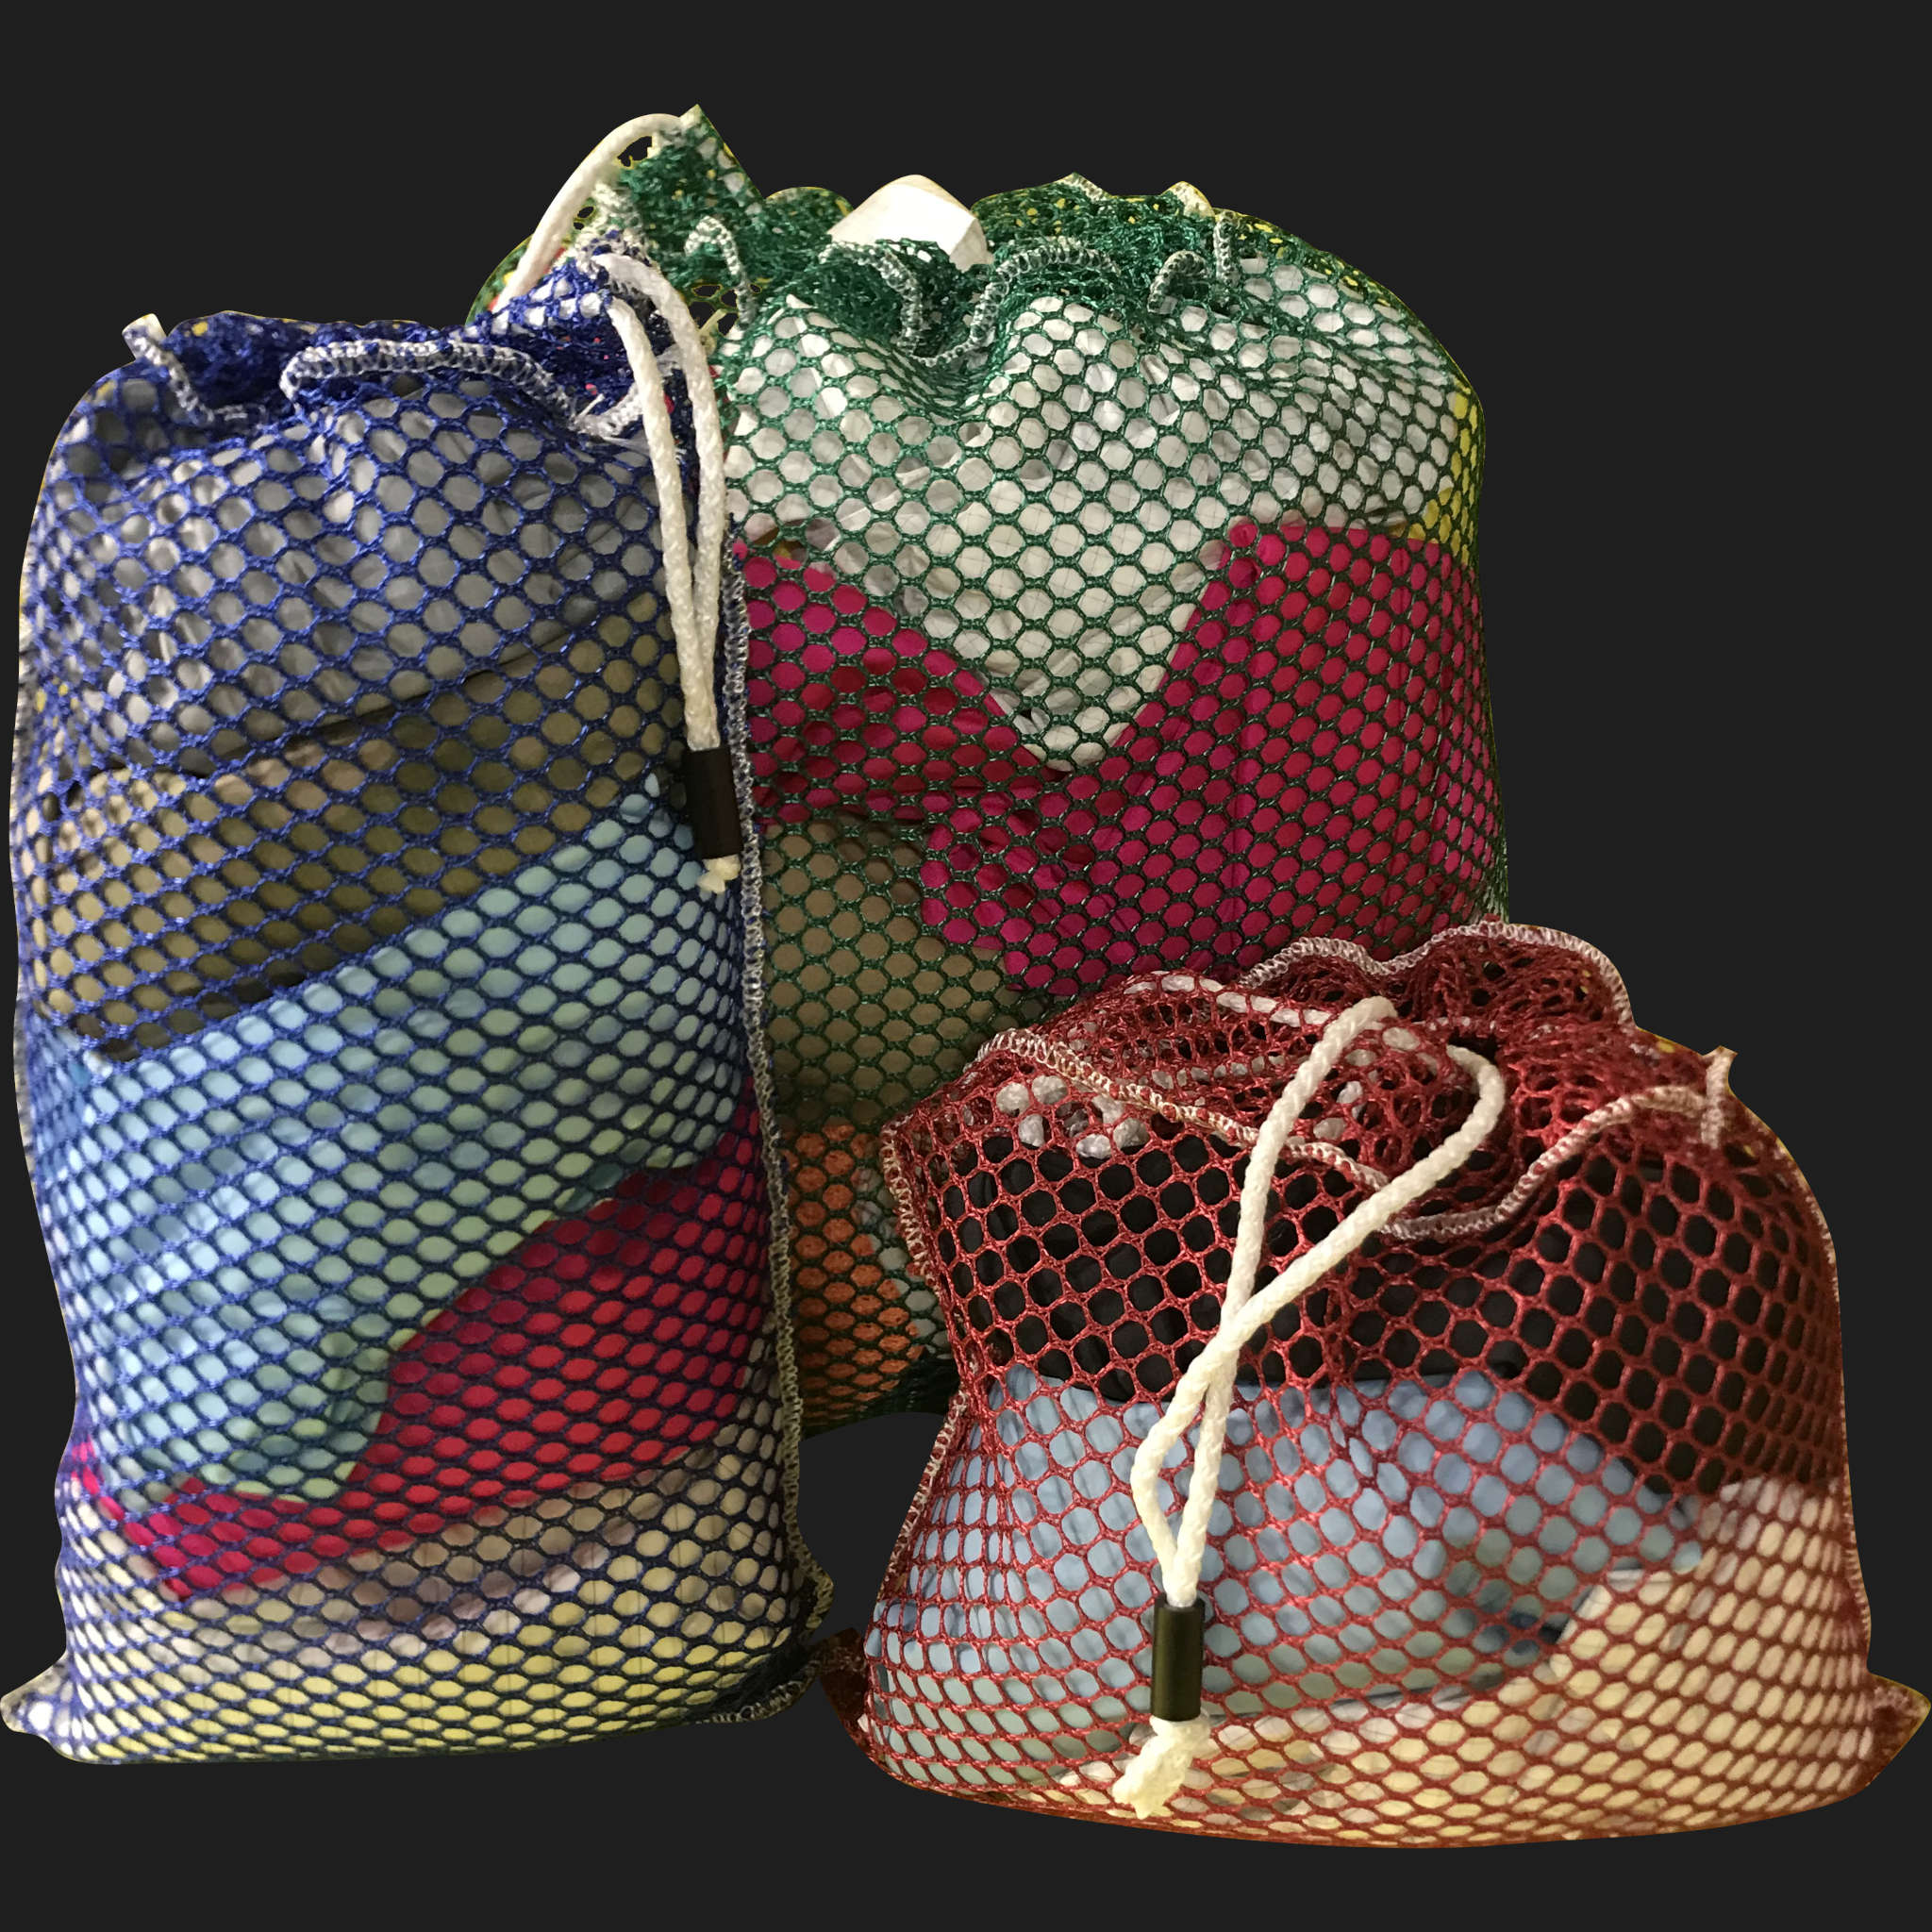 40" x 44" Customized Mesh-Net-Laundry Bags Heavy Duty with Cord and barrellock closure